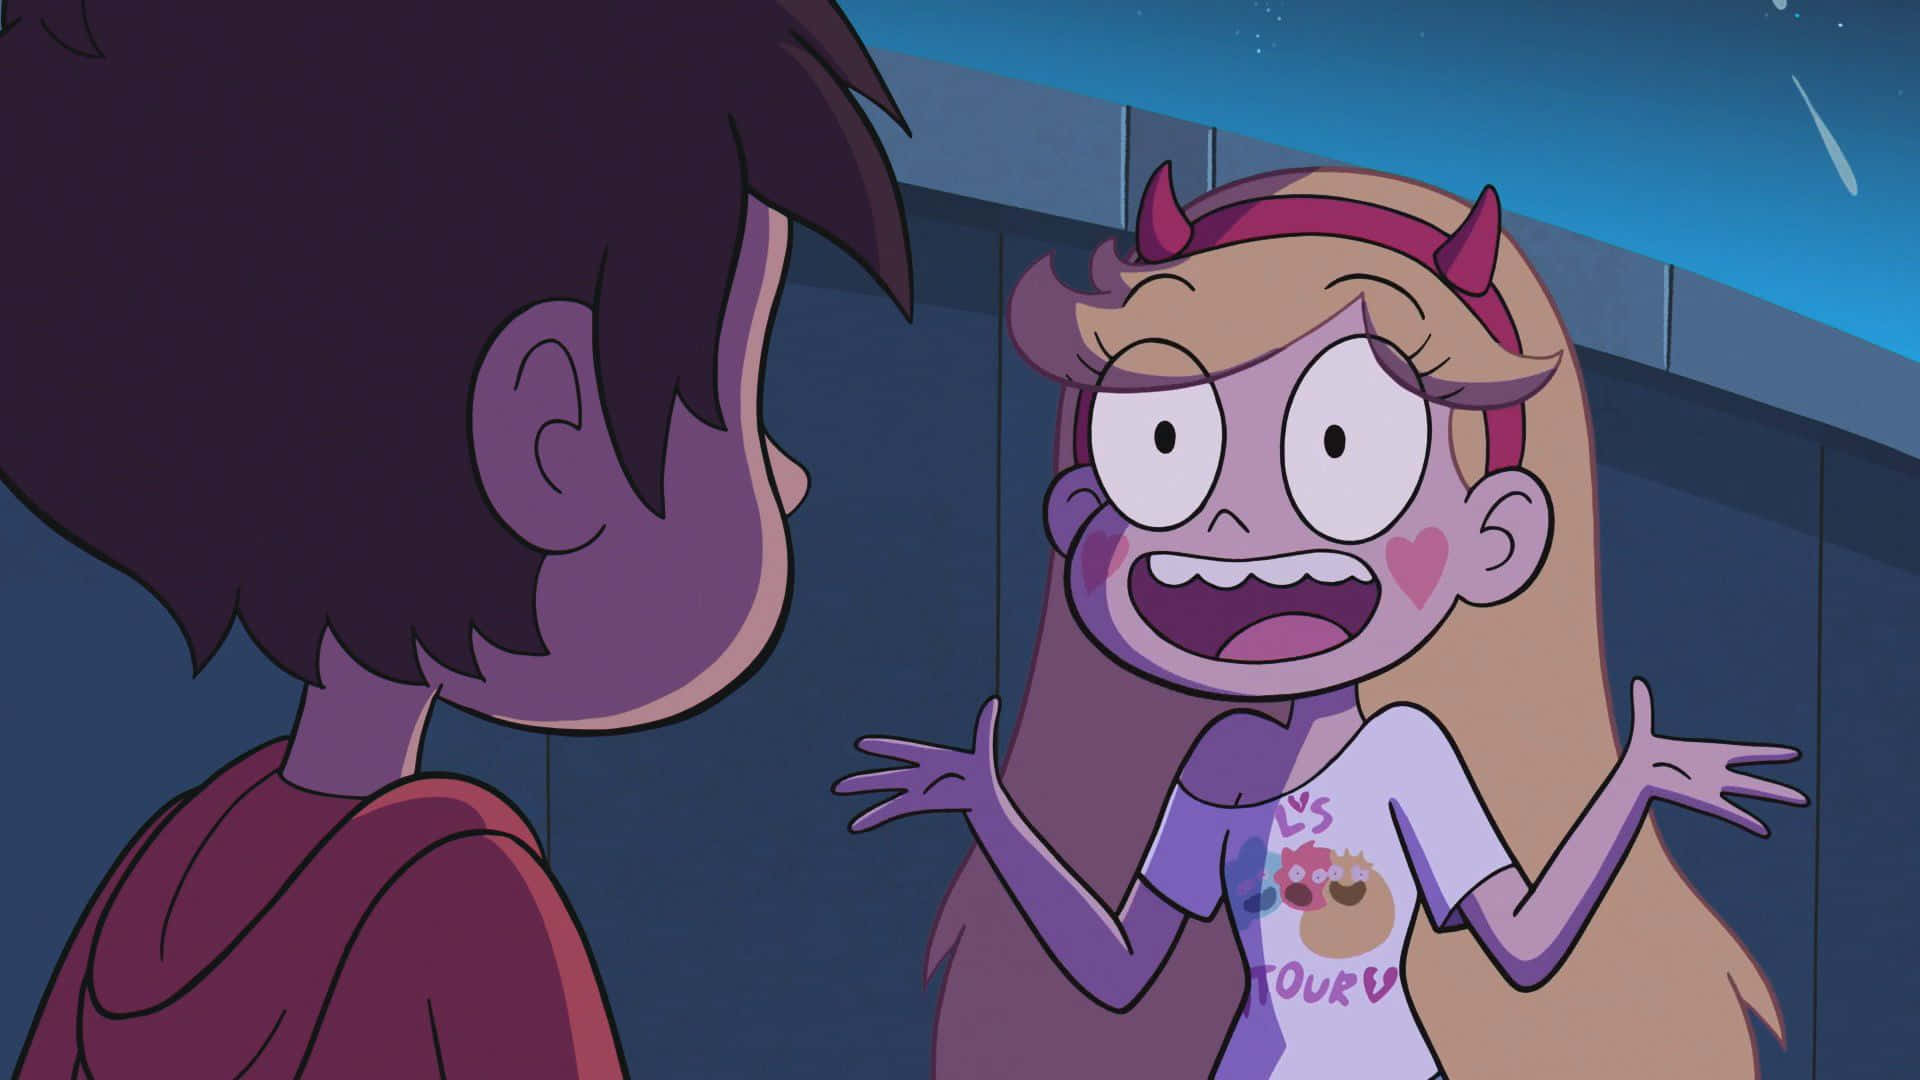 Star Butterfly and Marco Diaz in an enchanting world